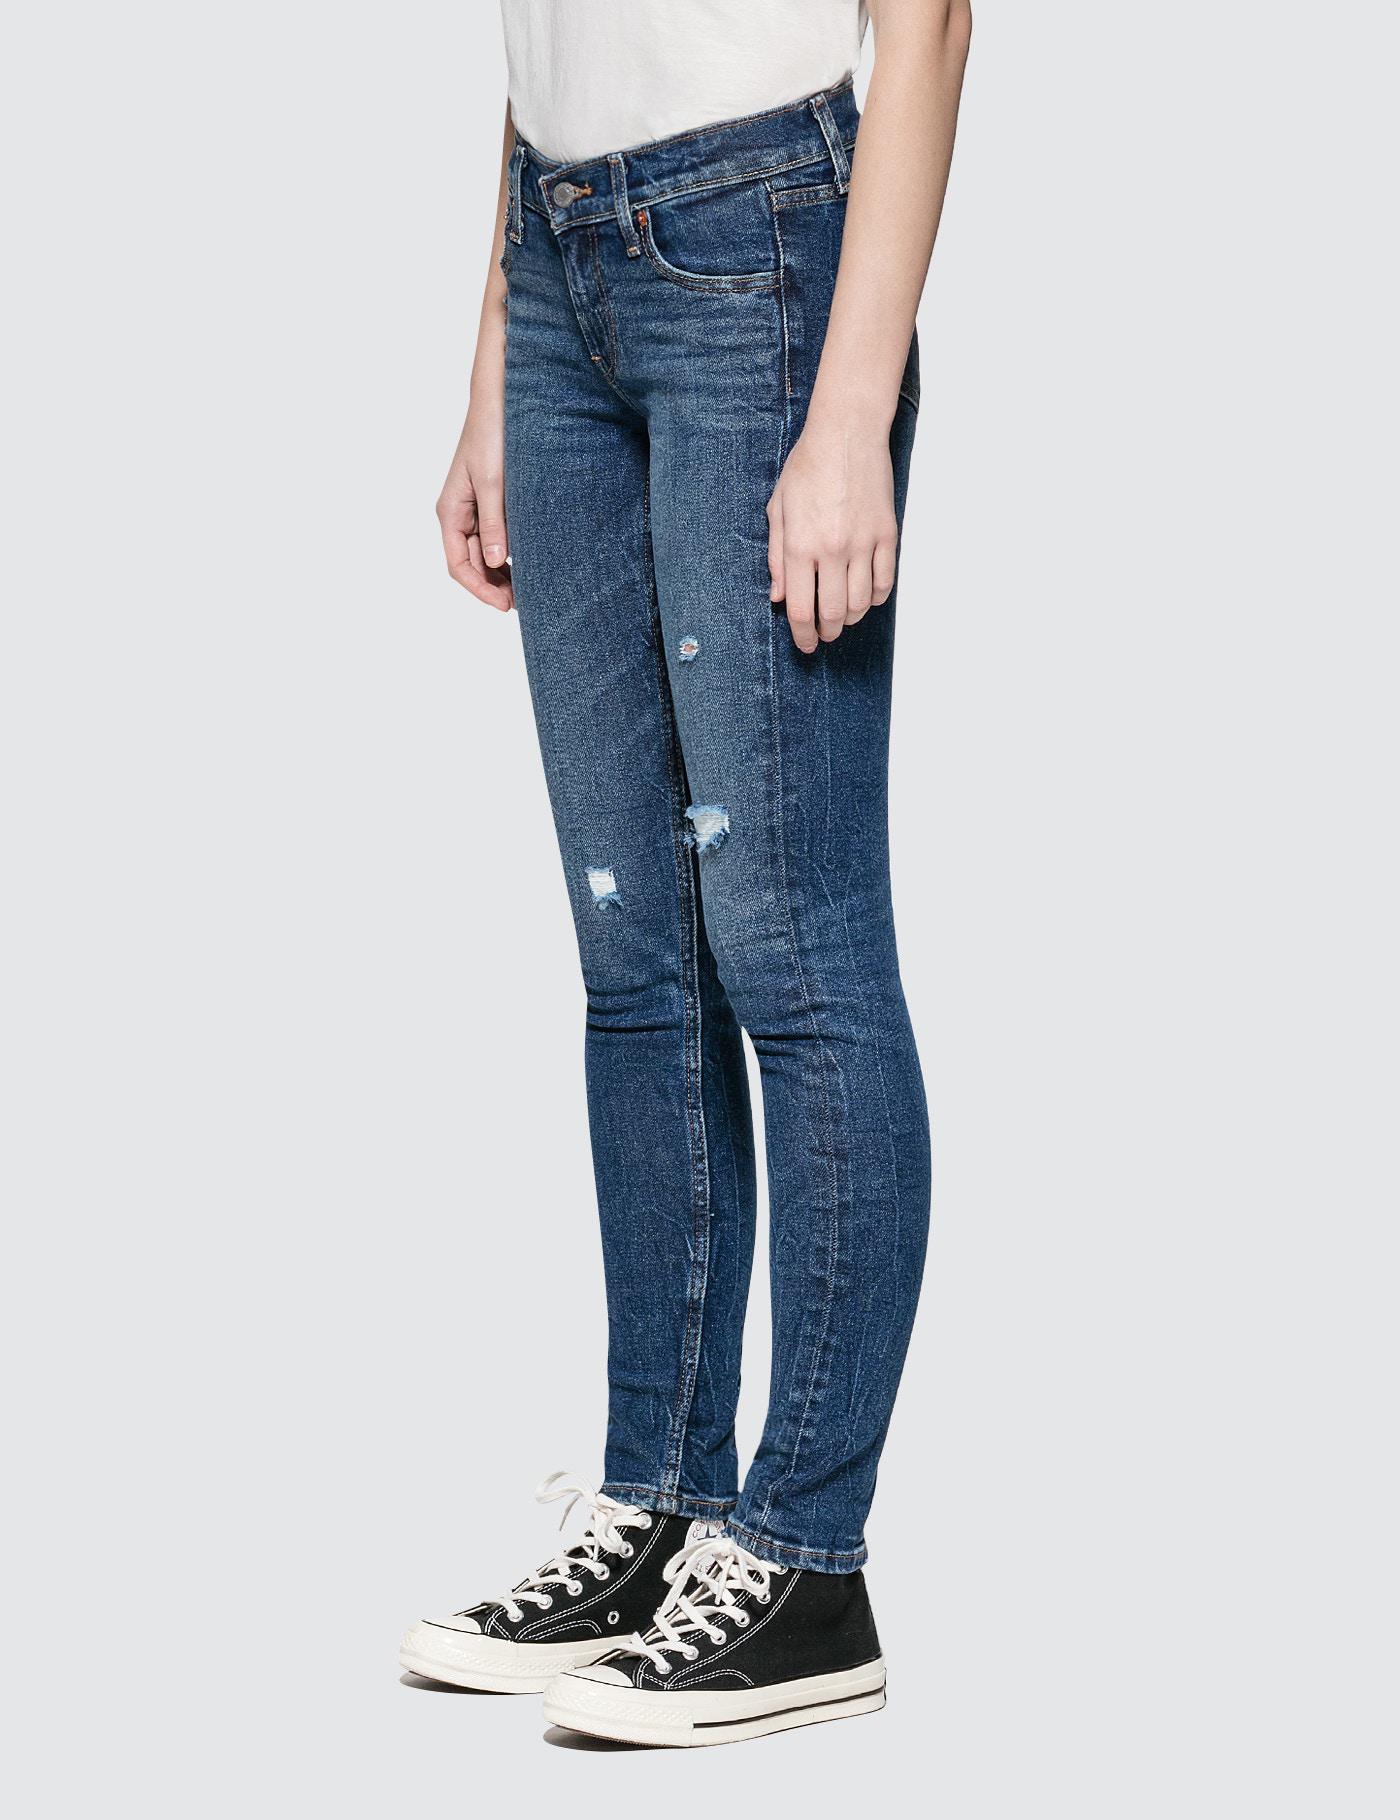 Levi's 711 Skinny Altered Mixtape Discount, SAVE 60%.